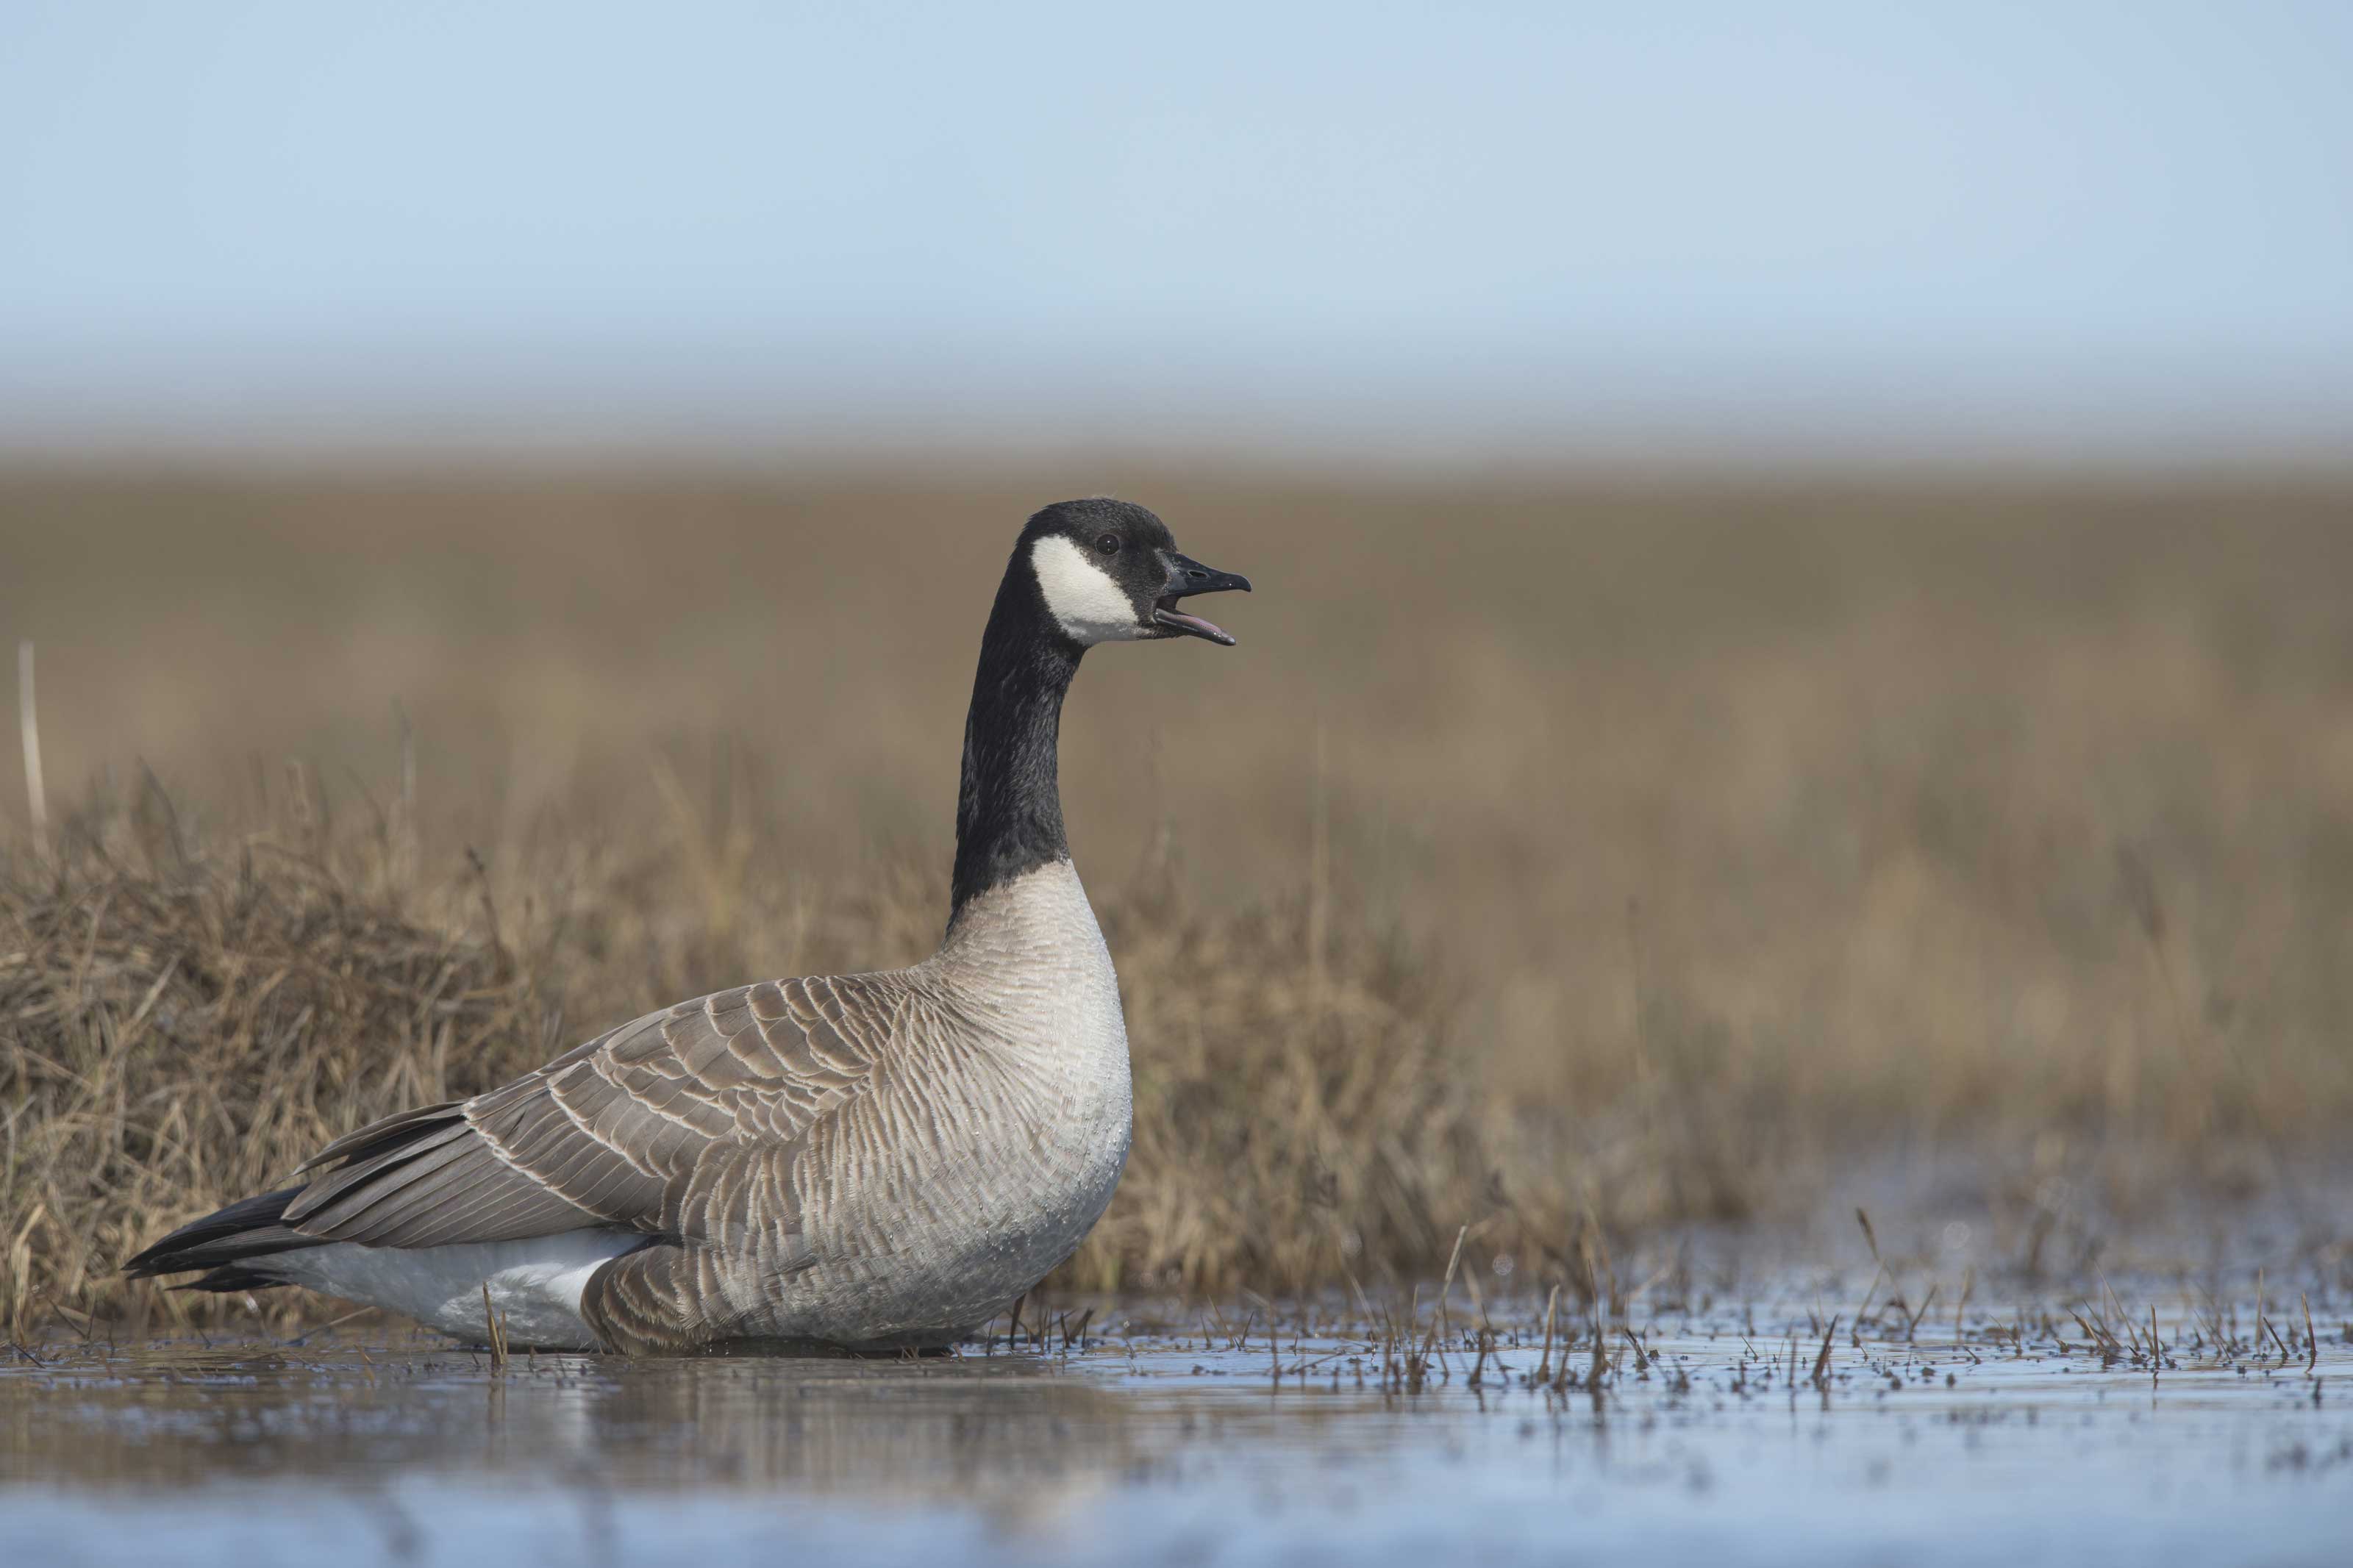 Canada geese make first drop into Fairbanks this year | Alaska ...